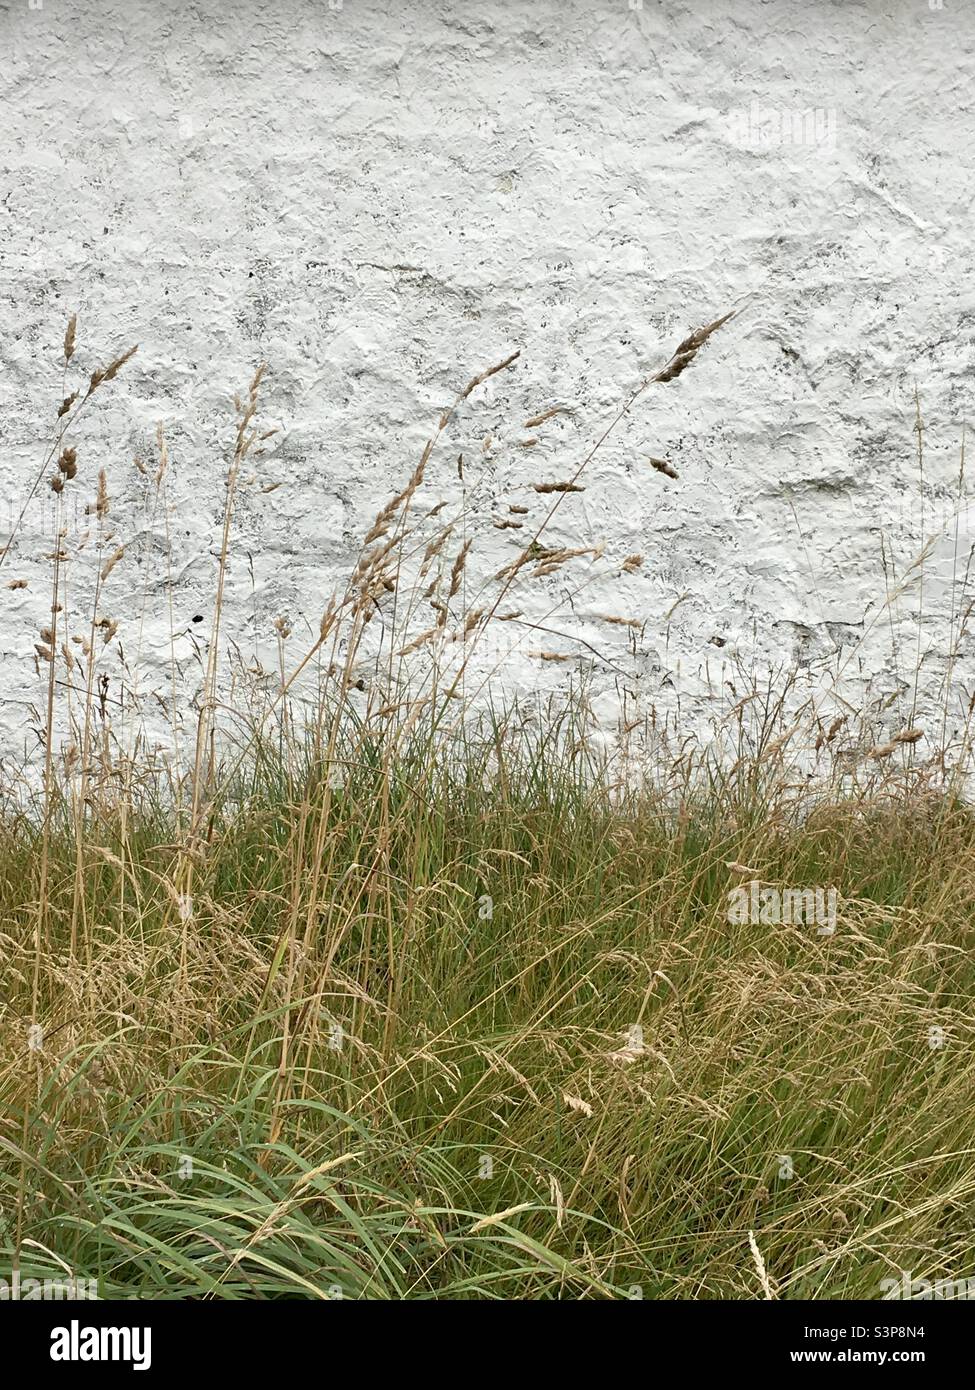 Long grass against white wash stone wall Stock Photo